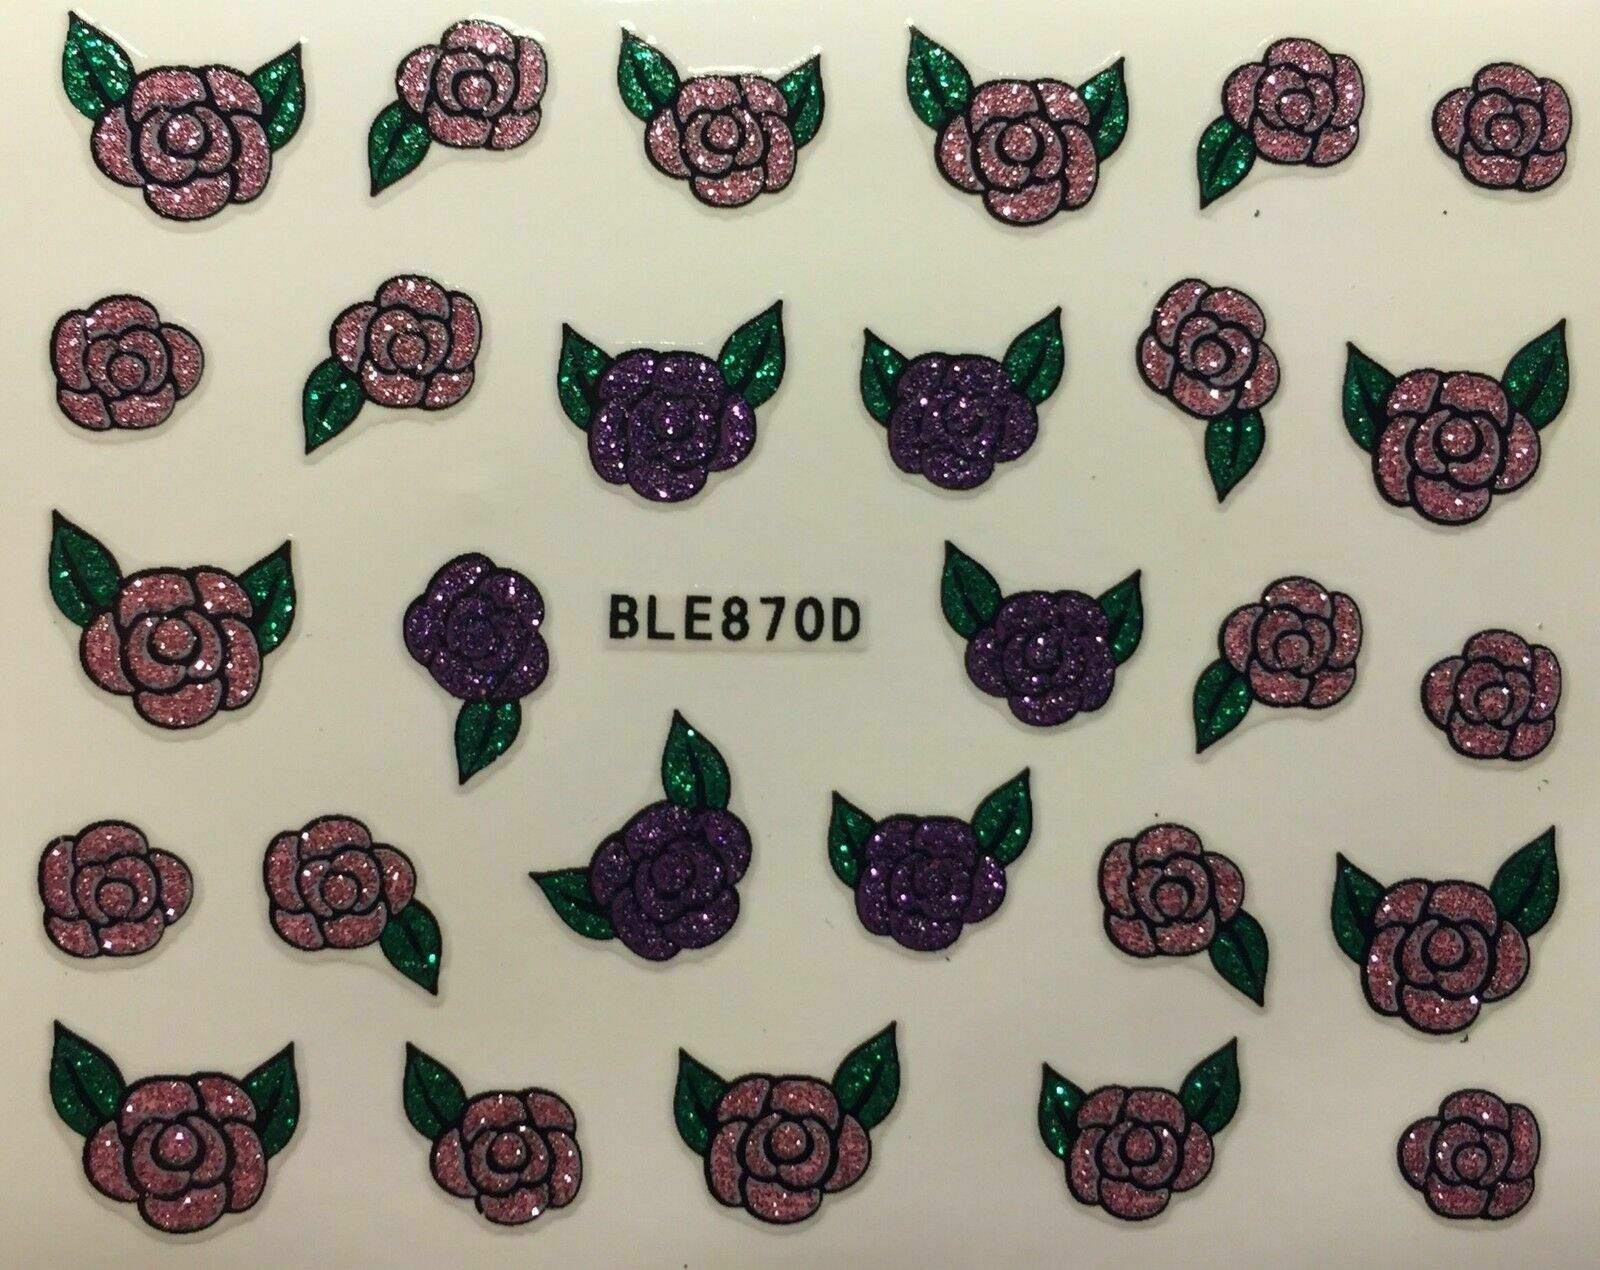 Nail Art 3D Decal Stickers Pink Purple Glittery Roses BLE870D